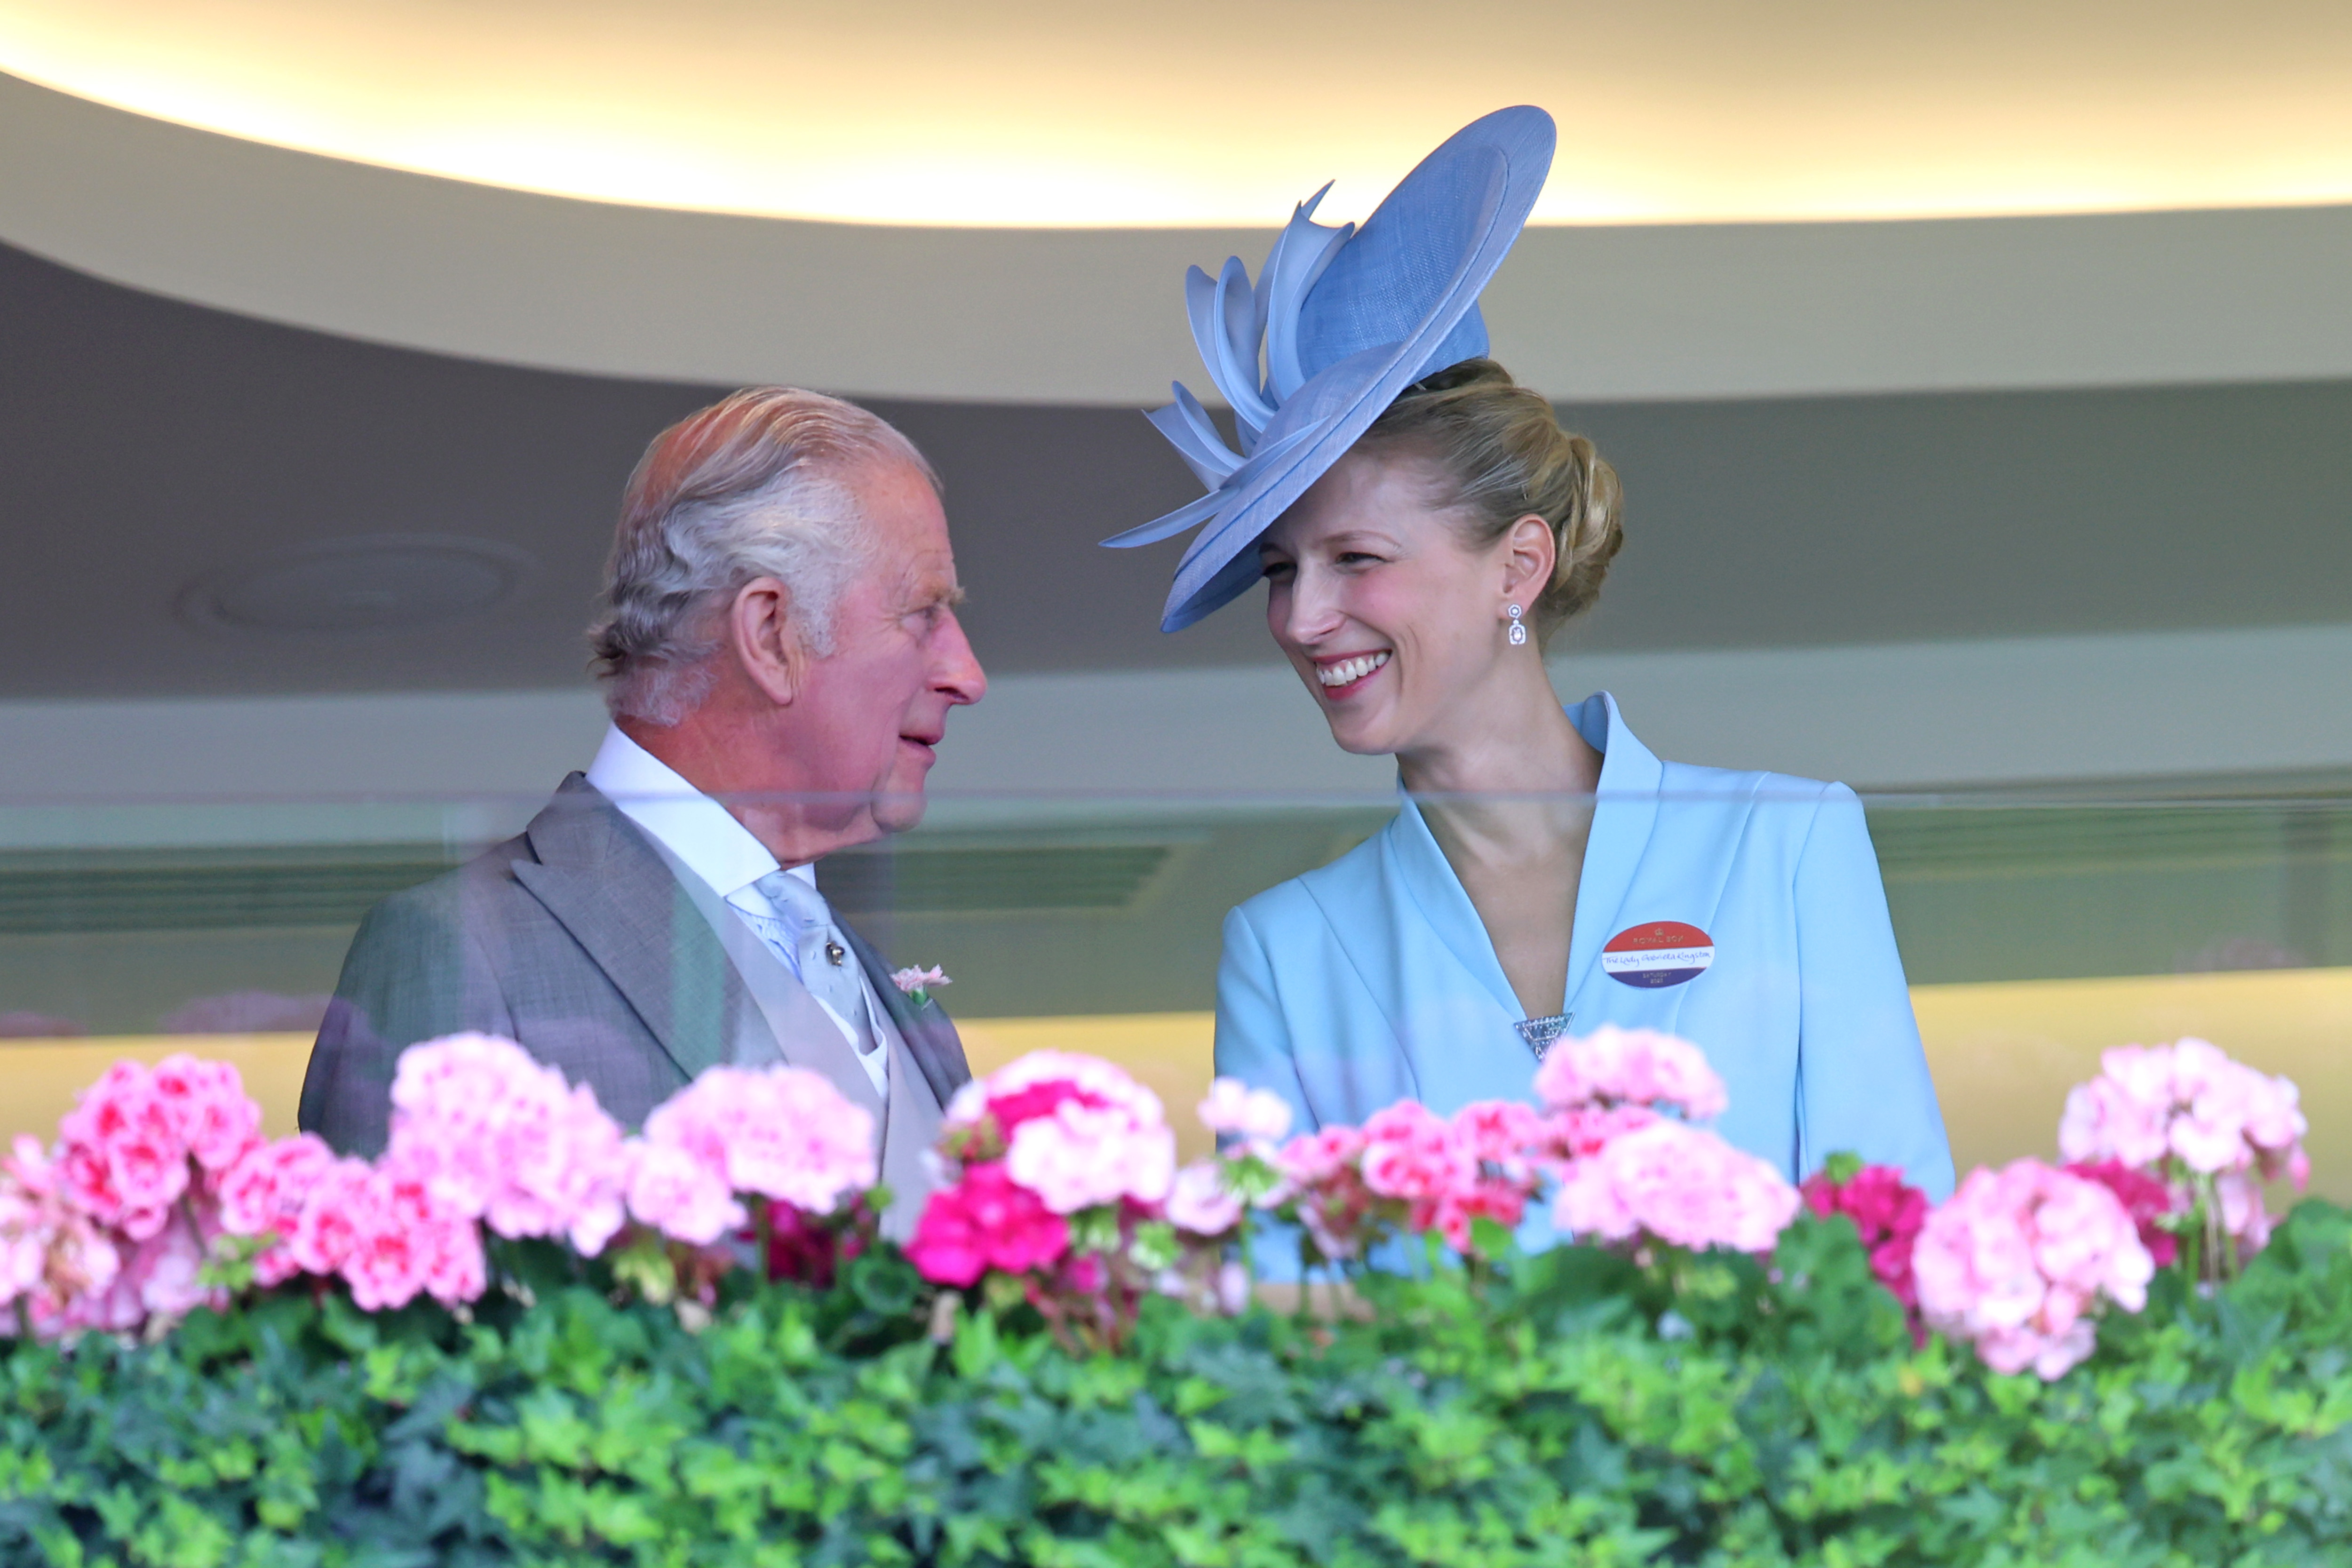 King Charles III and Lady Gabriella Kingston on day five of Royal Ascot 2023 at Ascot Racecourse on June 24, 2023 | Source: Getty Images